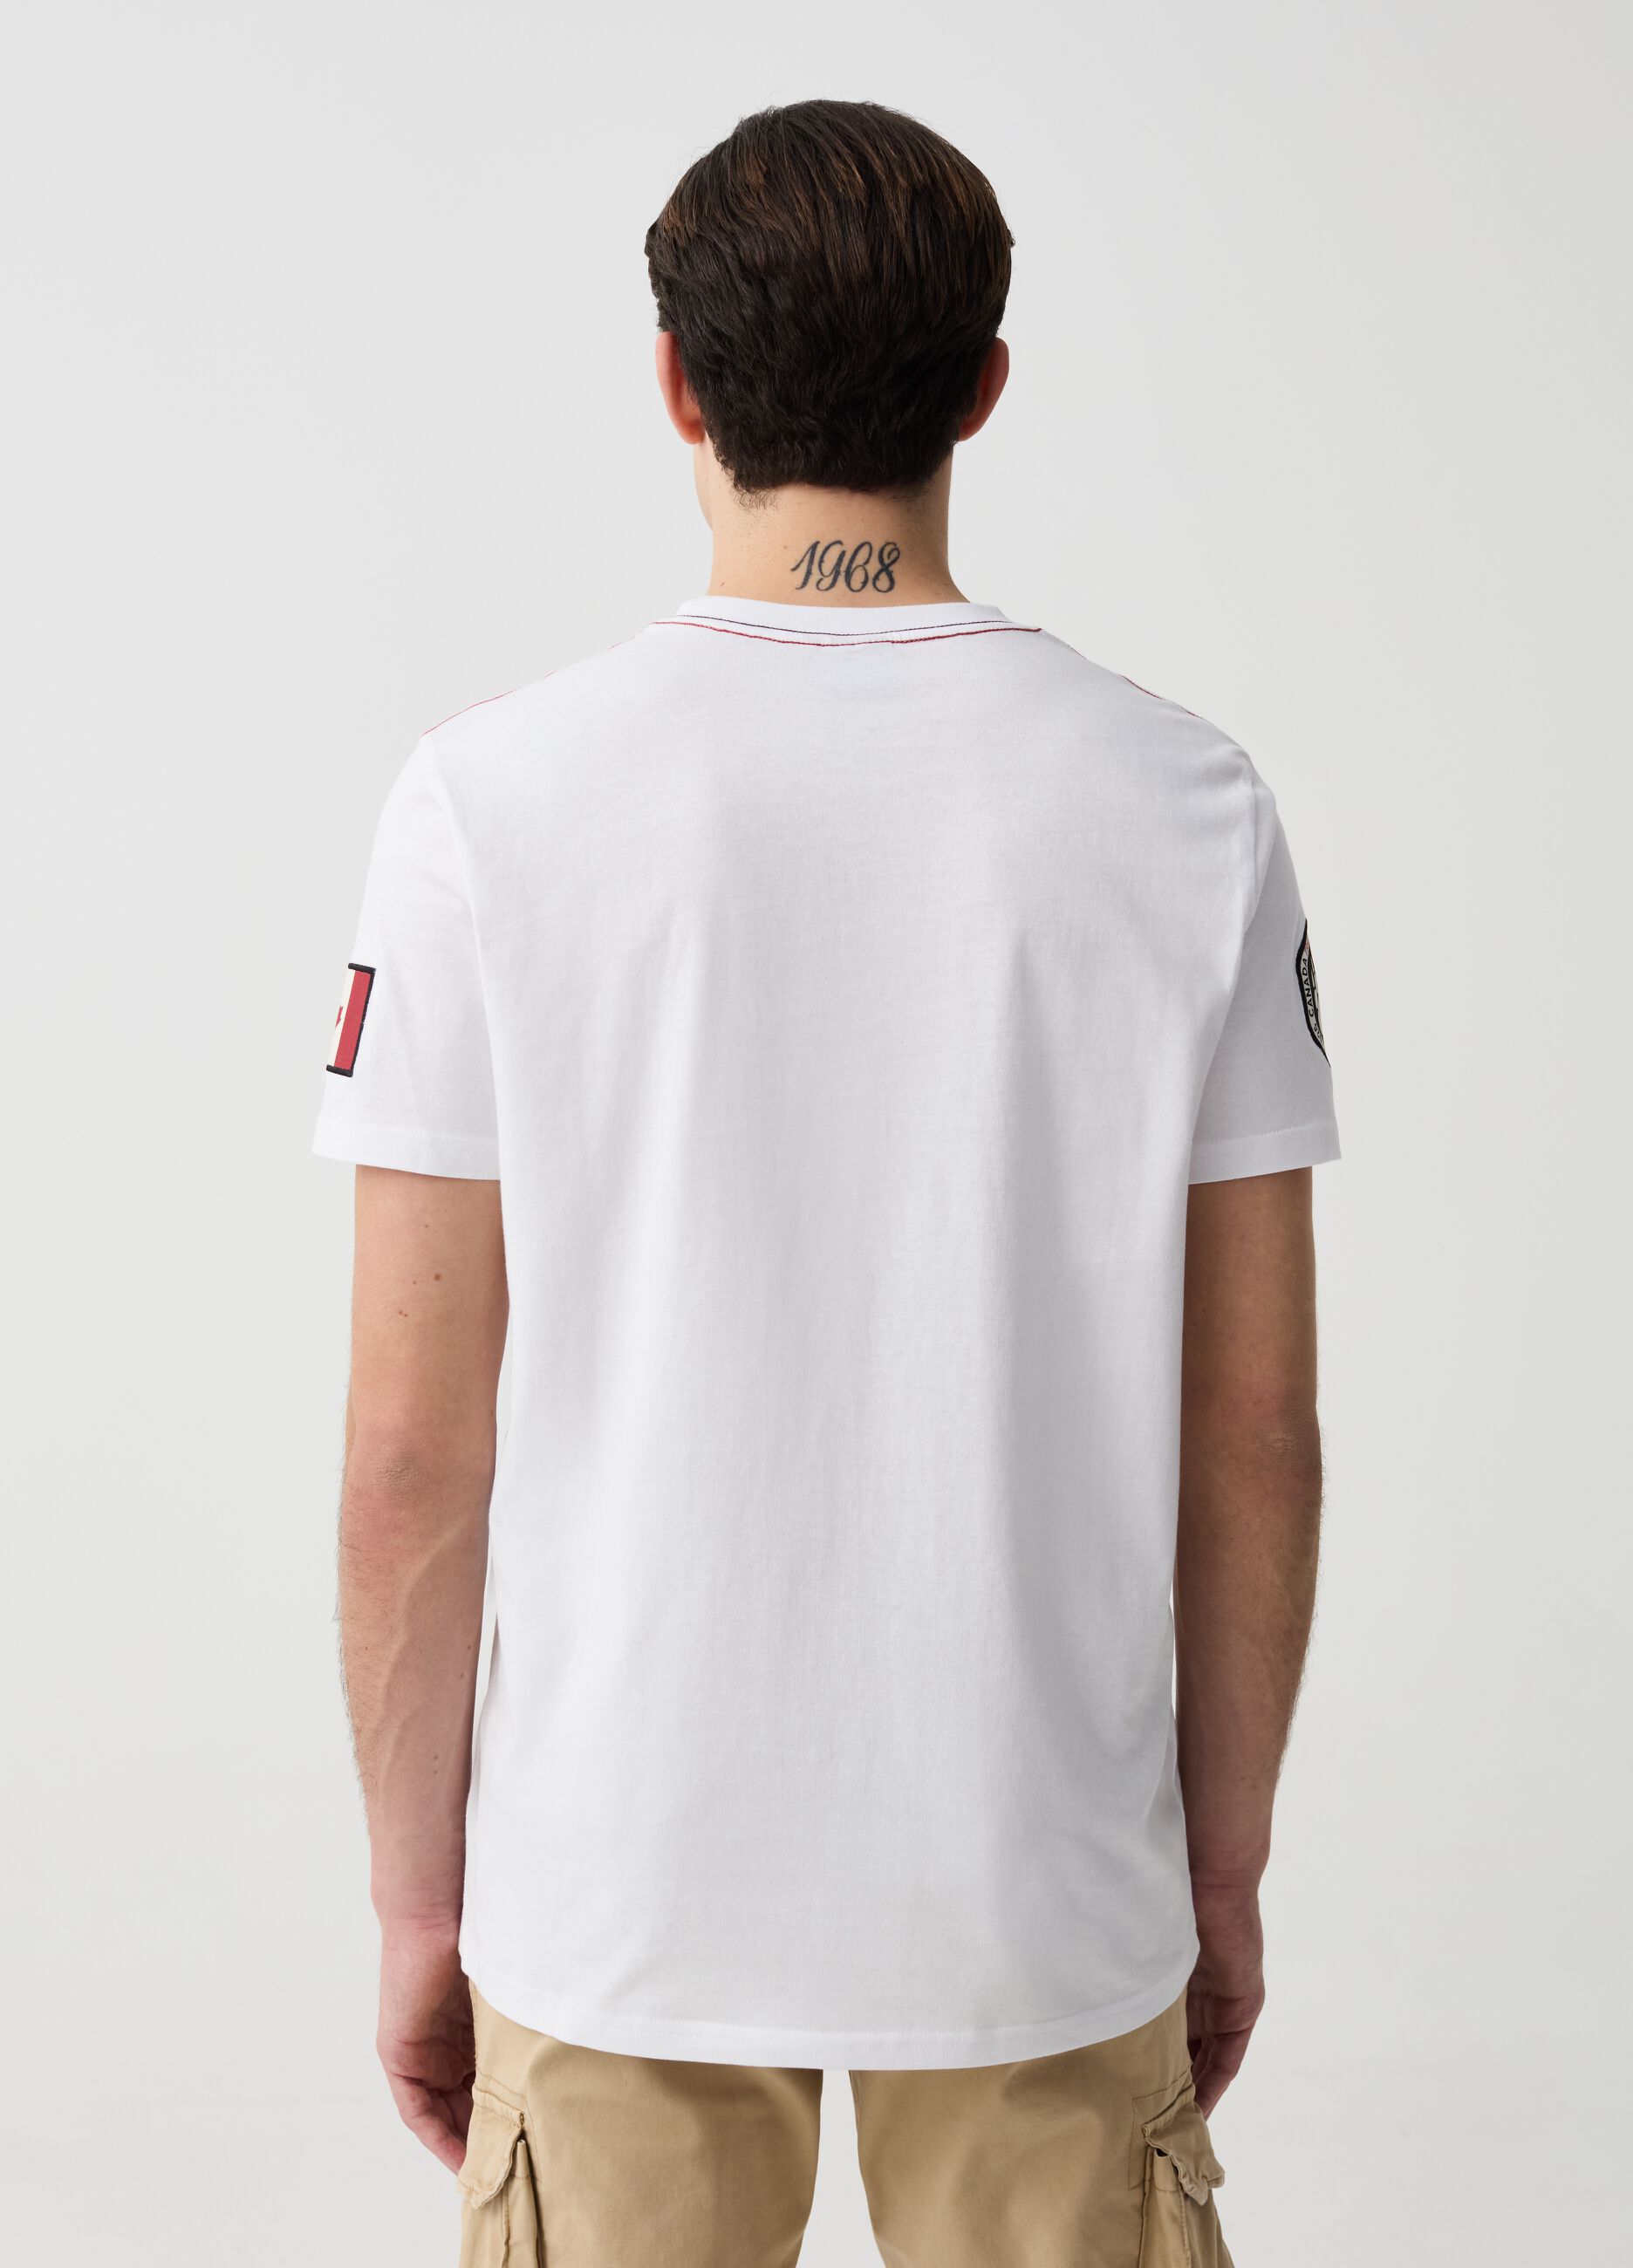 Canada Trail T-shirt with contrasting stitching